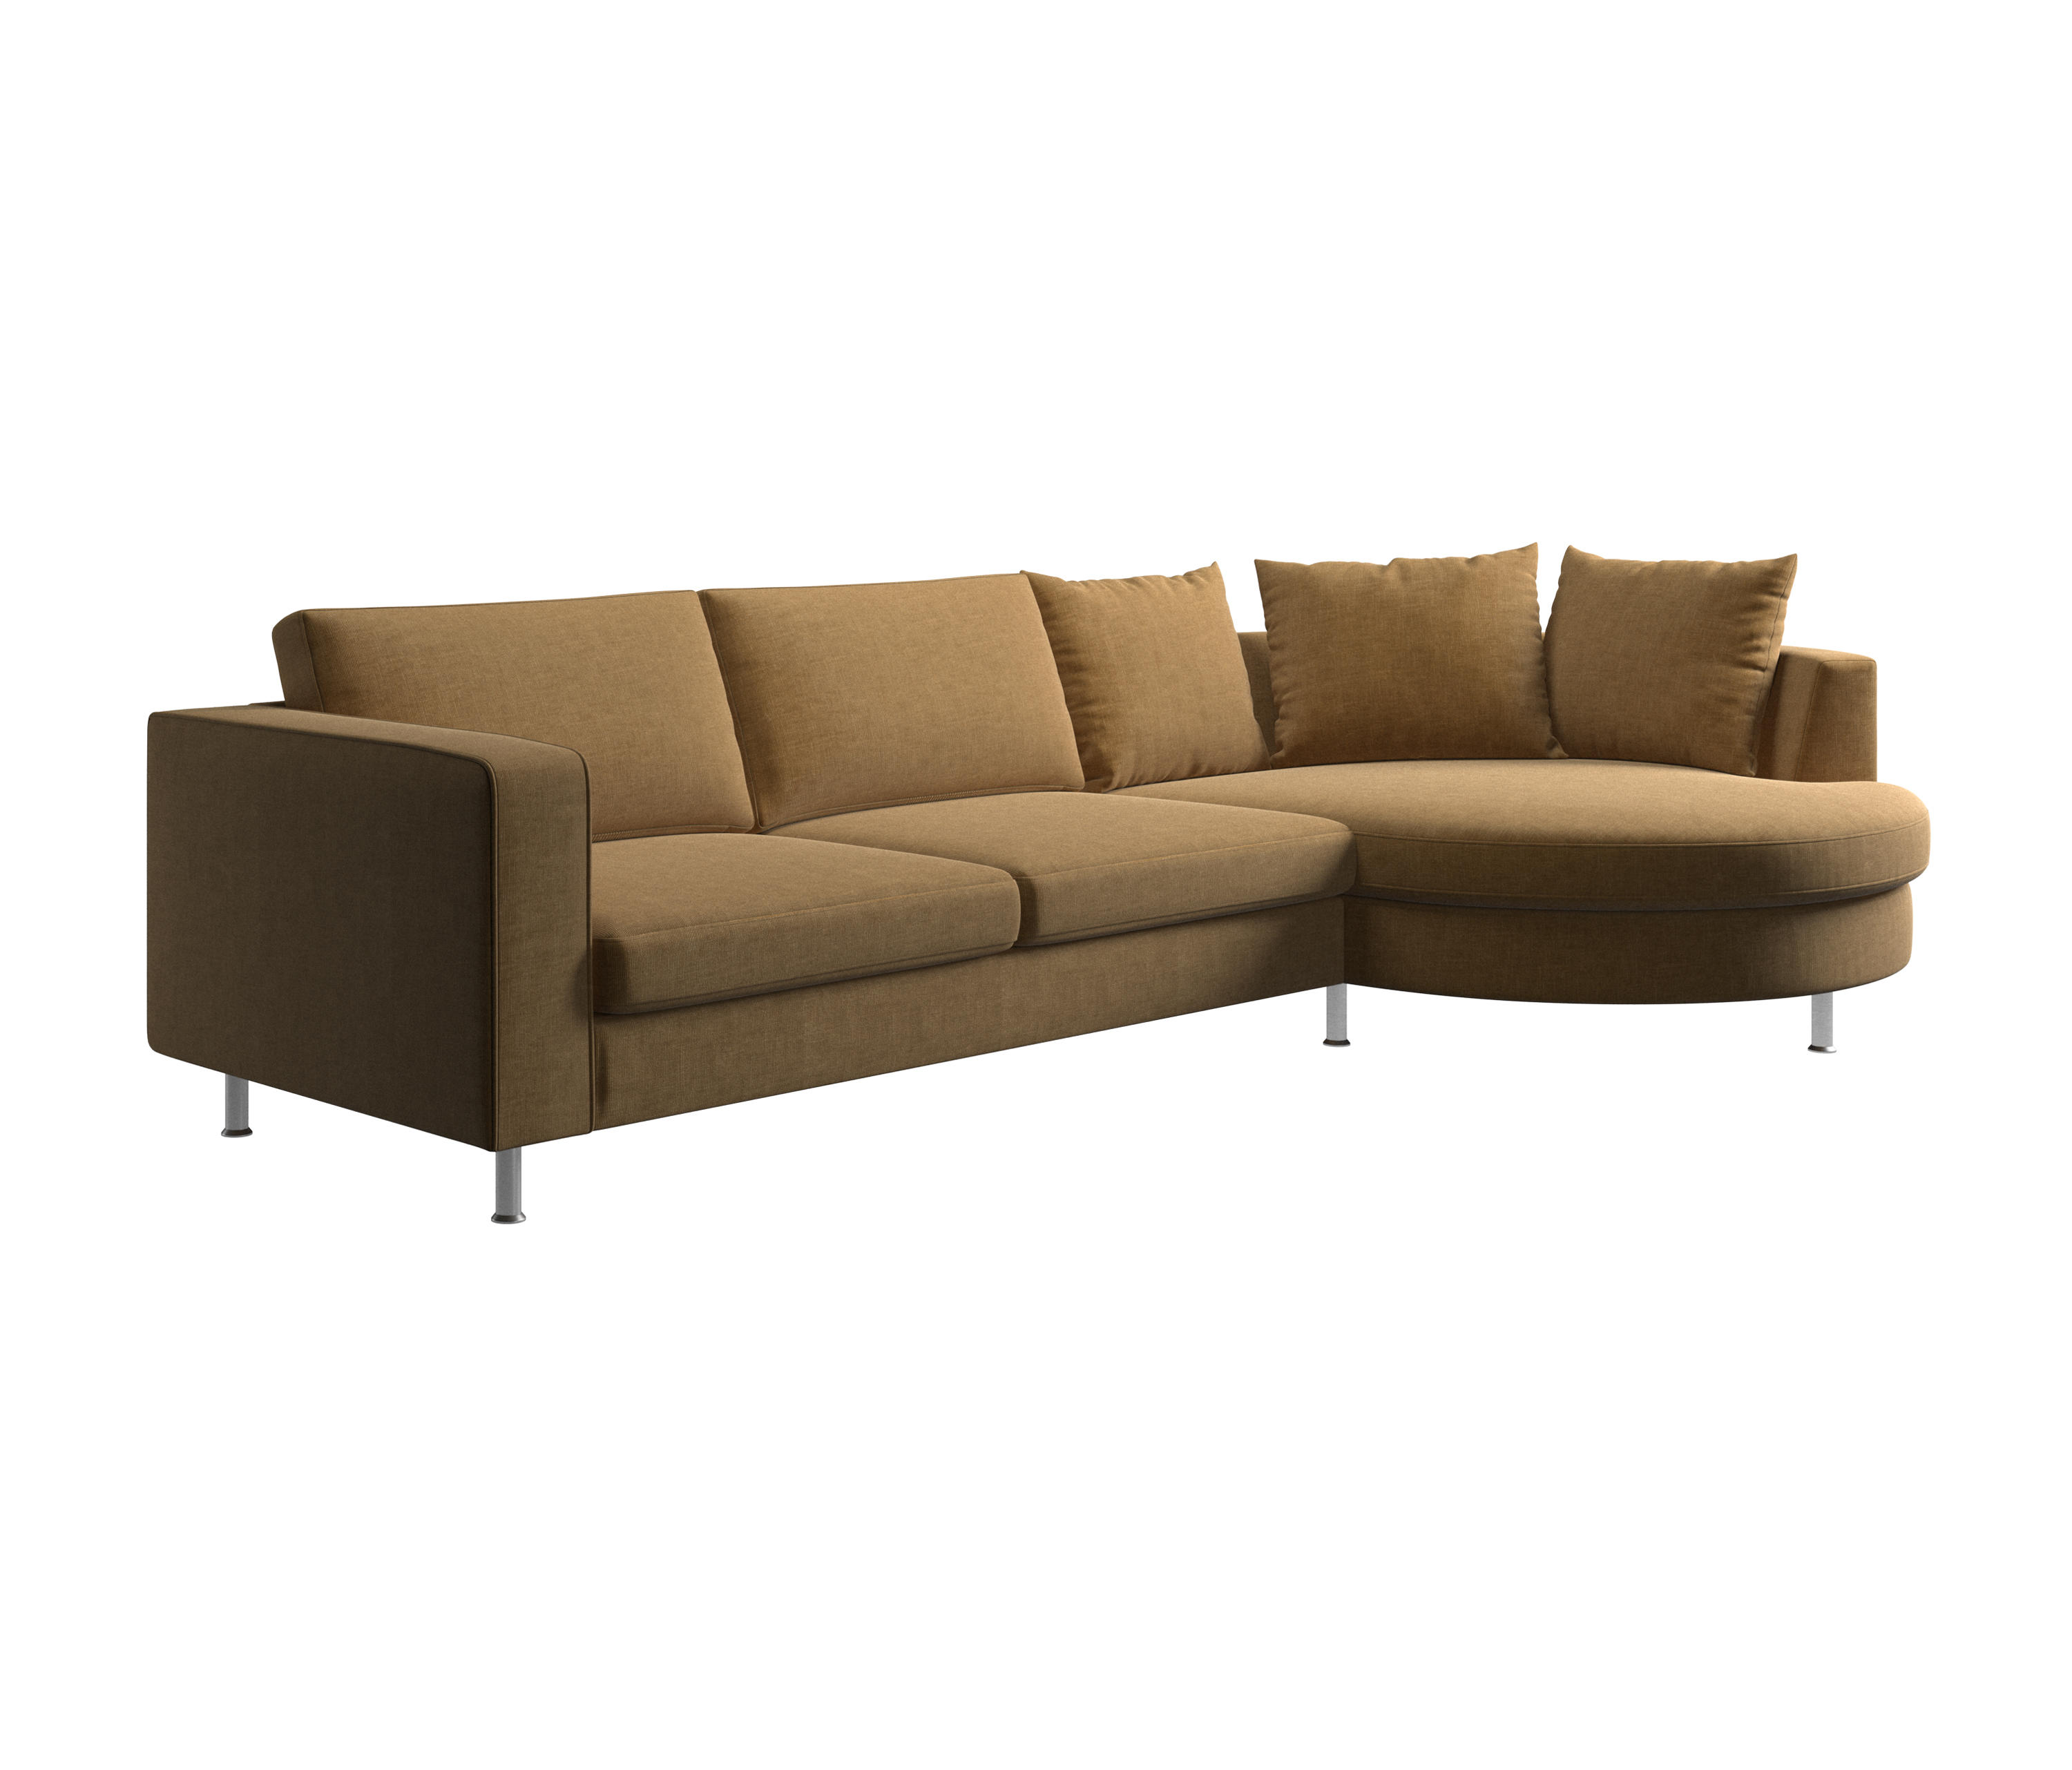 INDIVI ROUND - Sofas from BoConcept | Architonic